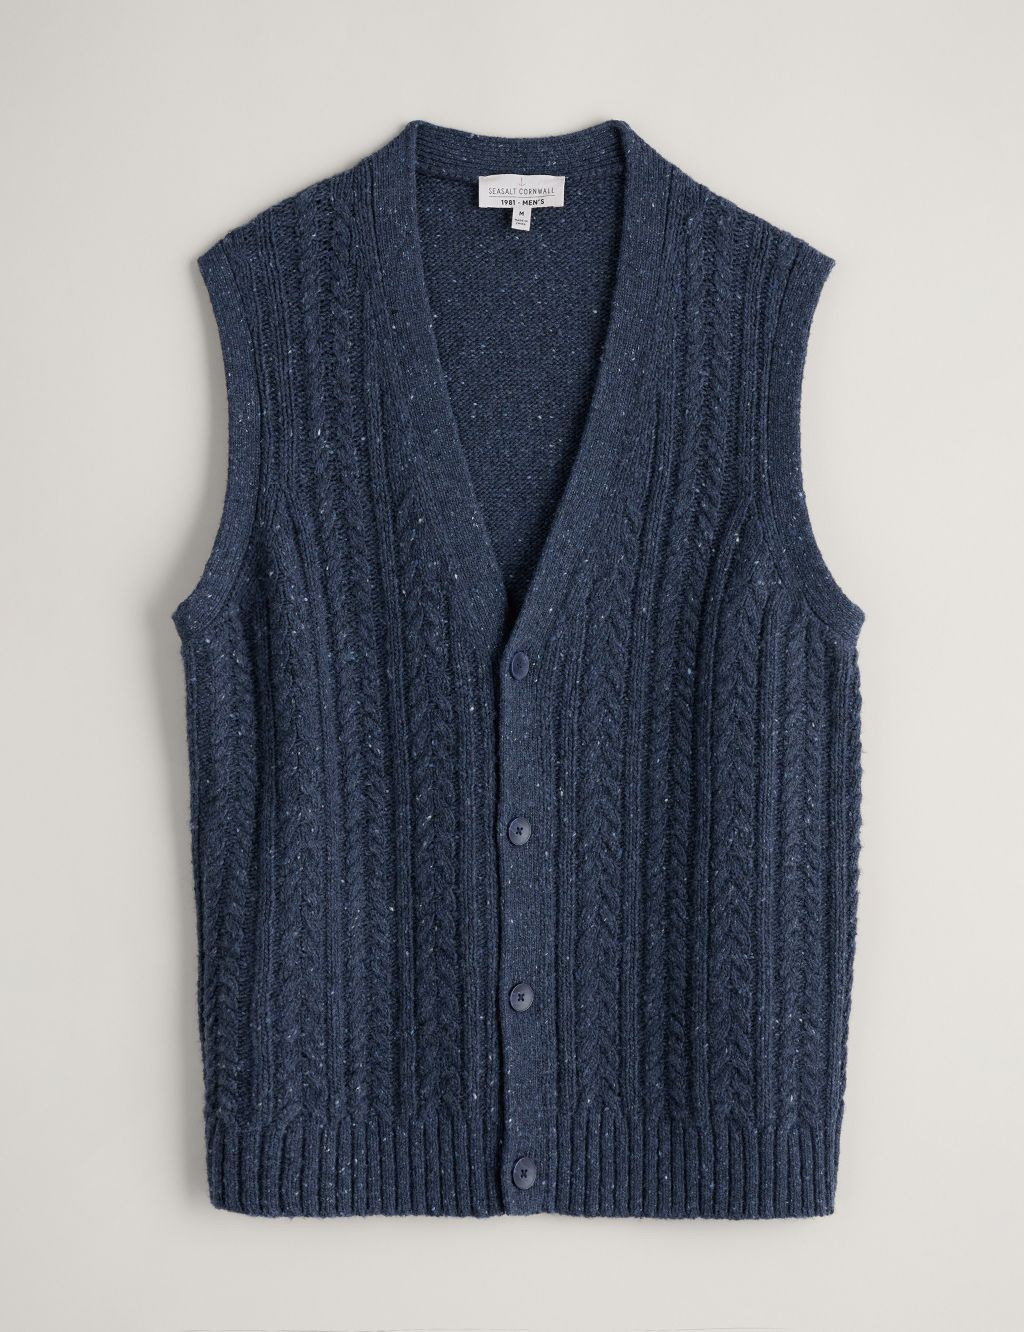 Merino Wool Rich Cable V-Neck Knitted Vest image 2